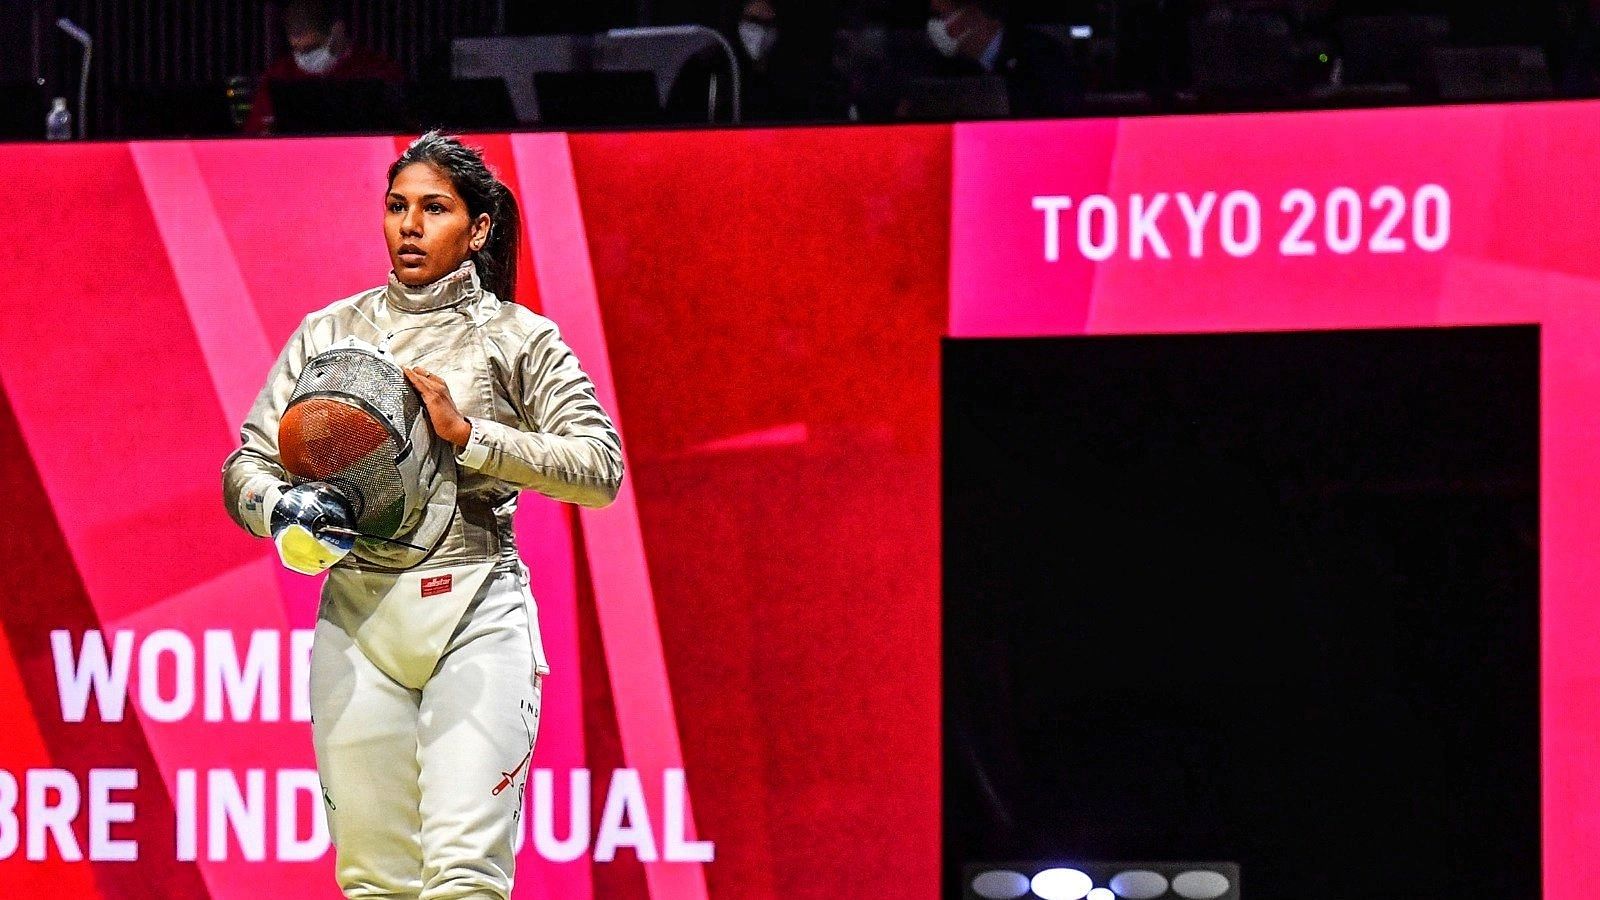 <div class="paragraphs"><p>Tokyo Olympics: Bhavani Devi apologizes after loosing fencing match, PM Modi reacts calling her "an inspiration"</p></div>